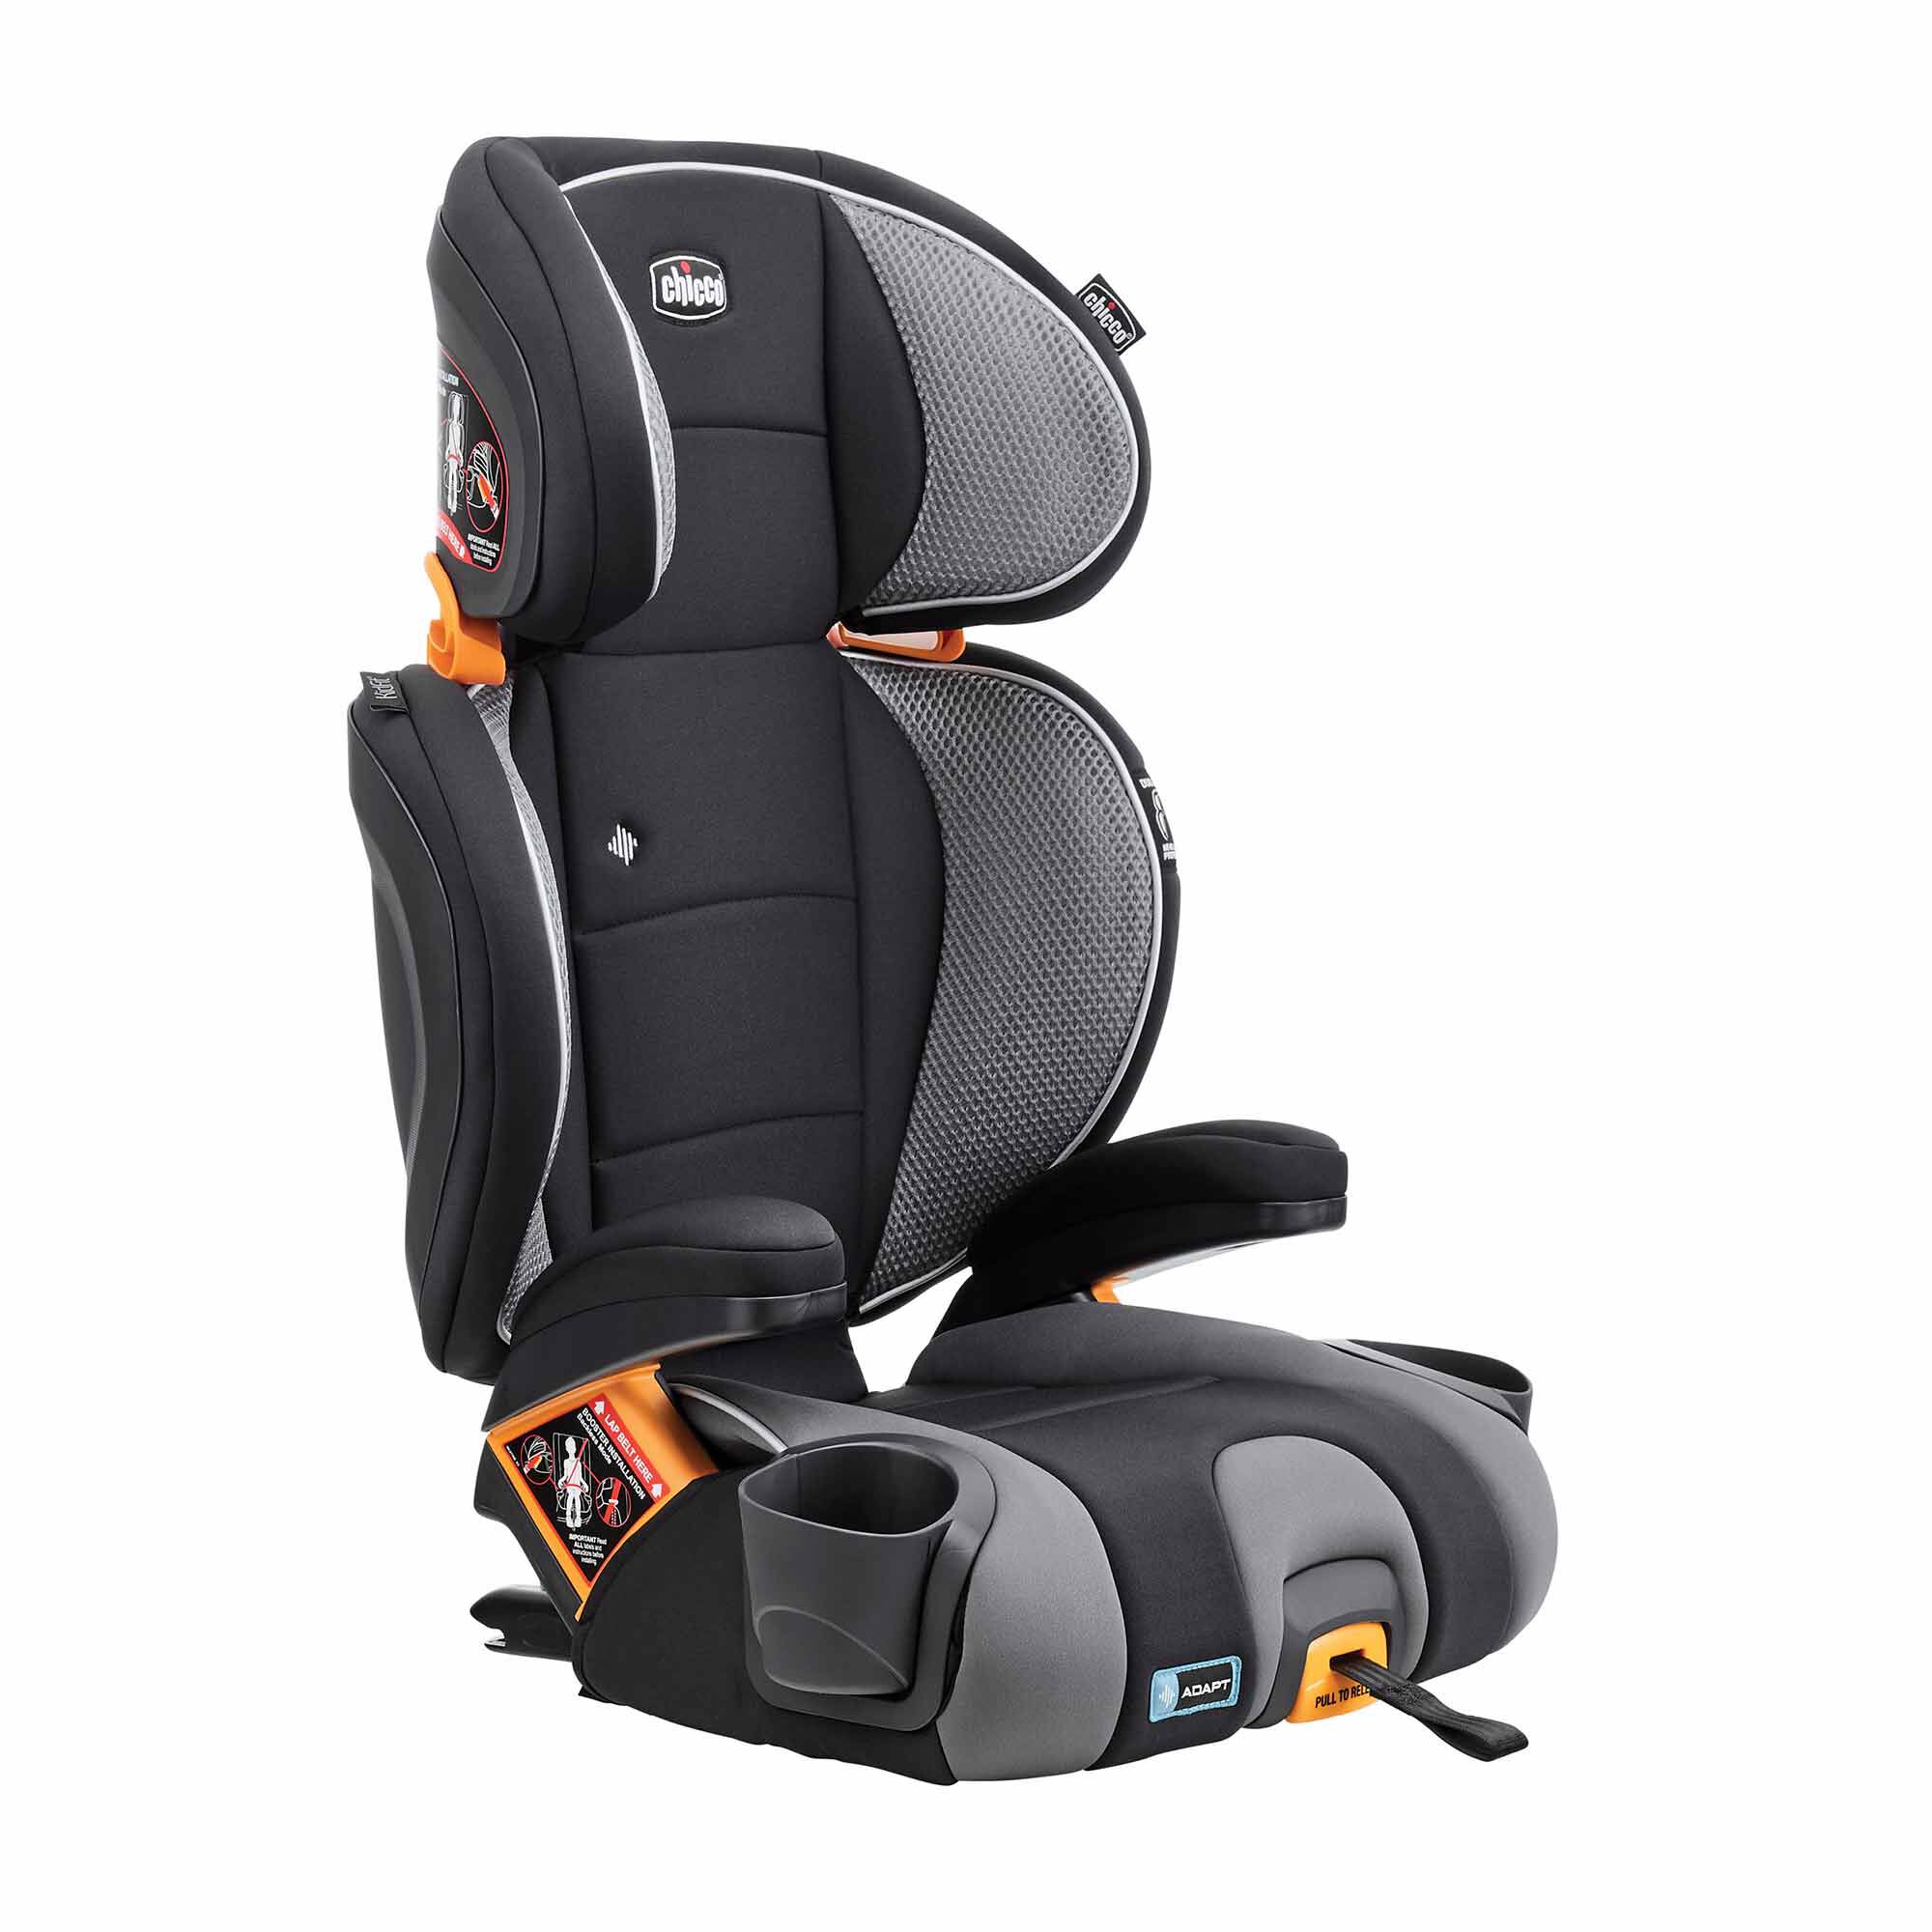 https://www.chiccousa.com/dw/image/v2/AAMT_PRD/on/demandware.static/-/Sites-chicco_catalog/default/dw4d8cd654/images/products/Gear/kidfit-adapt/KidFit-Adapt-Plus-Ember-CarSeat-3Q-Front.jpg?sw=2000&sh=2000&sm=fit